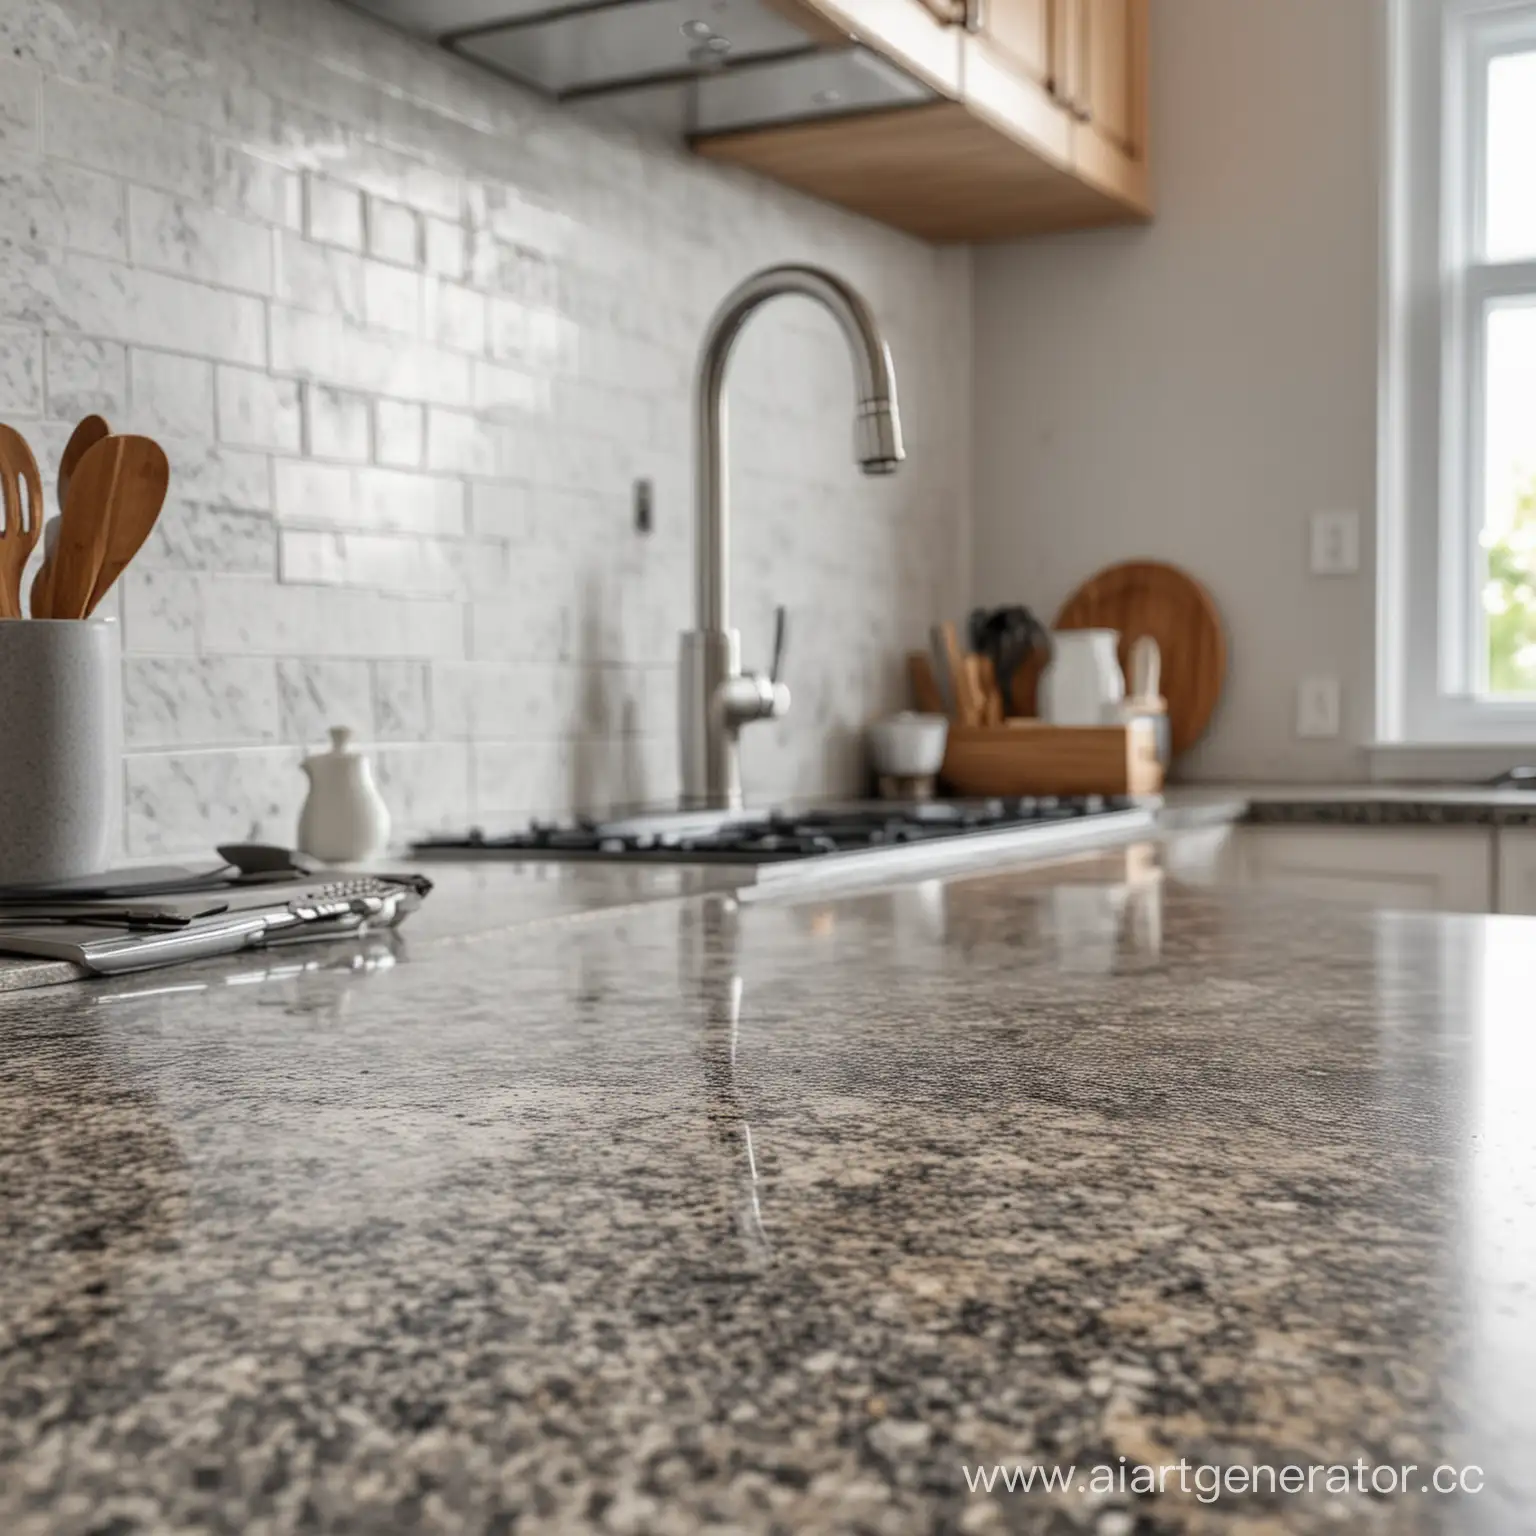 CloseUp-of-Polished-Granite-Countertop-Amidst-a-WellEquipped-LightFilled-Kitchen